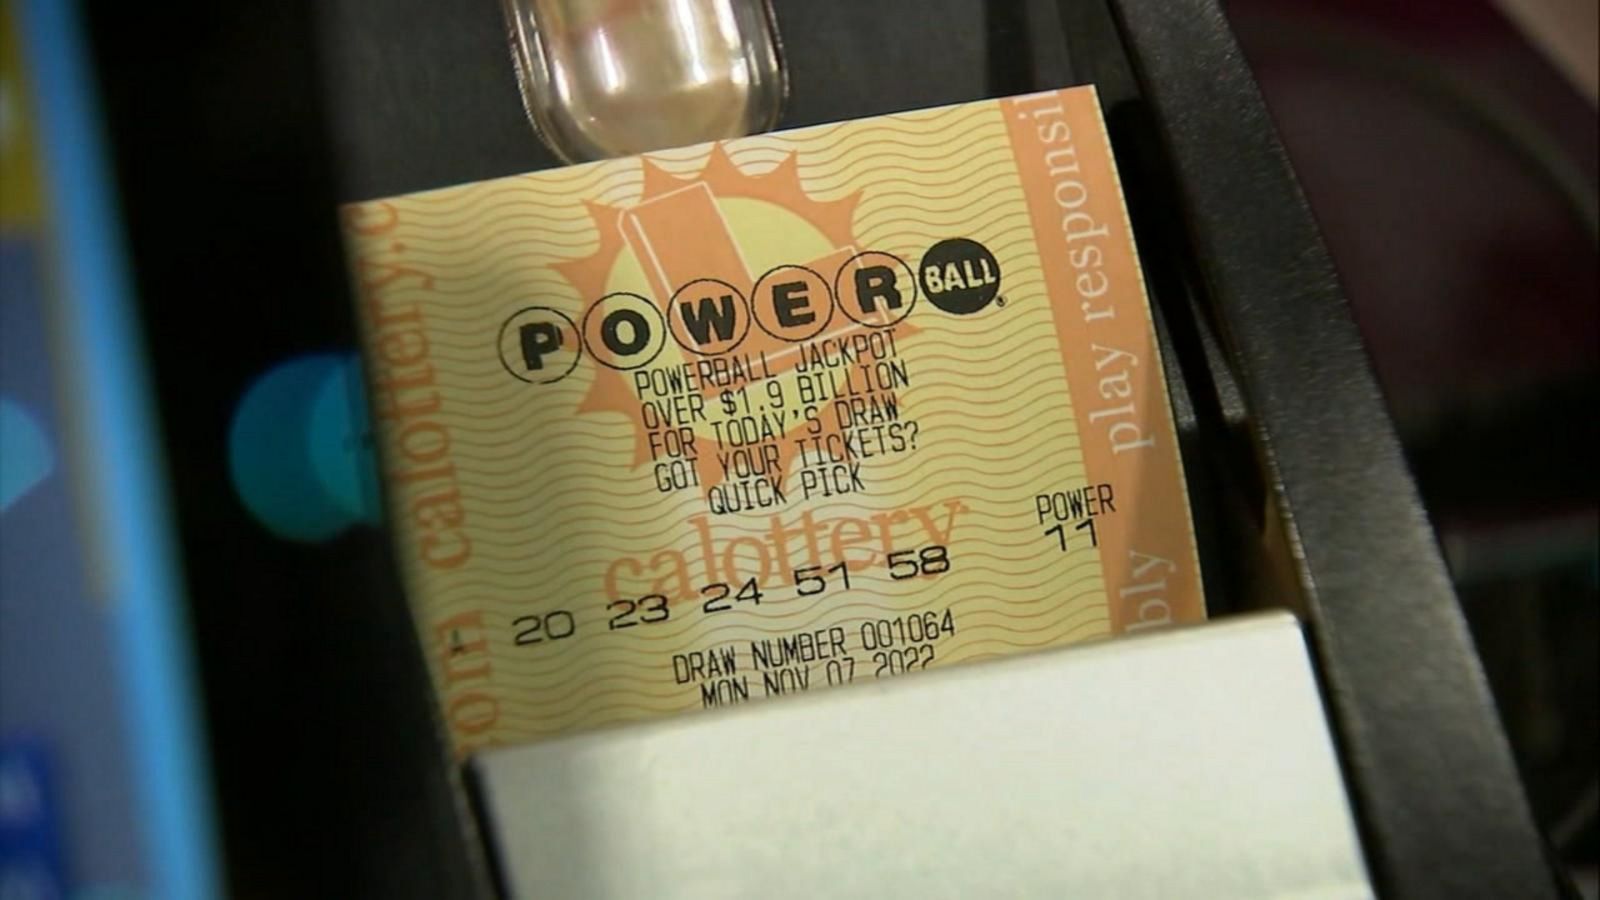 VIDEO: Search is on for winner of $1B Powerball jackpot